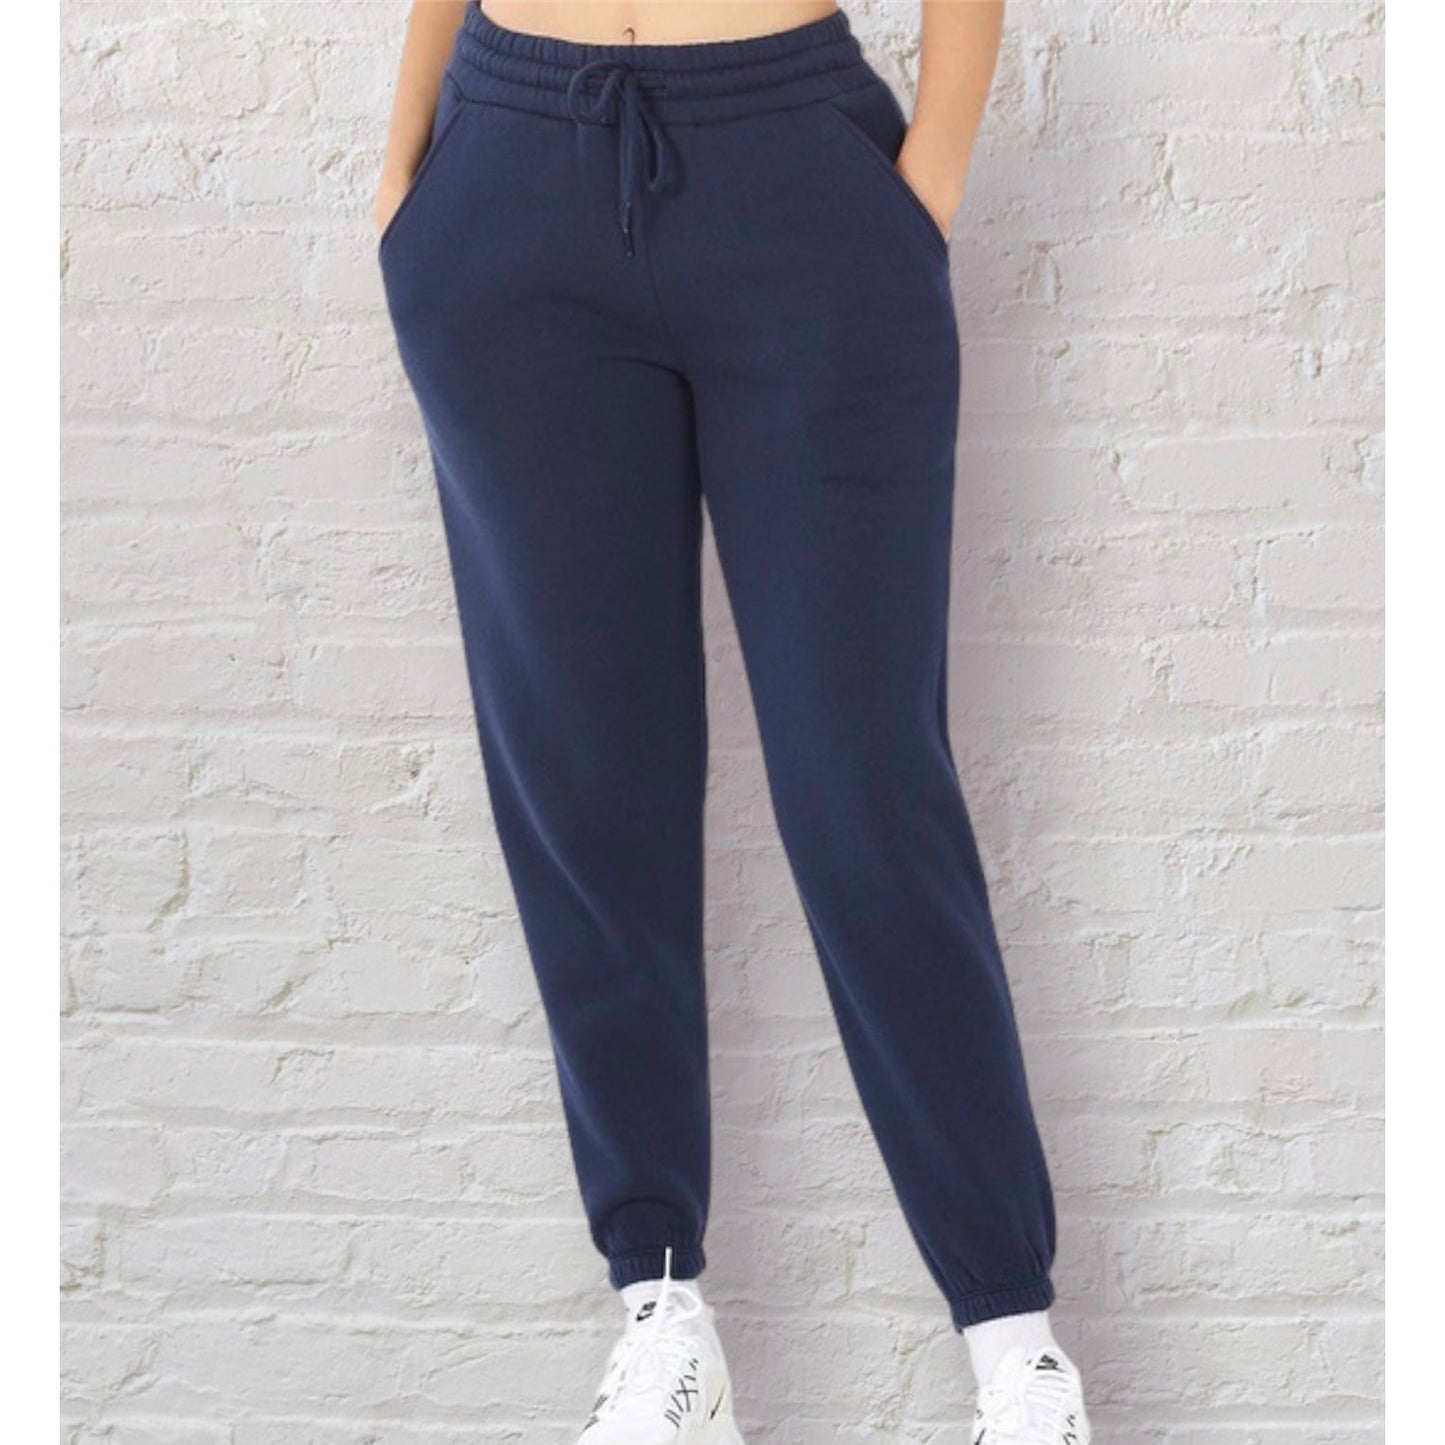 Everyday Joggers in Navy Blue - Kiyana Boutique